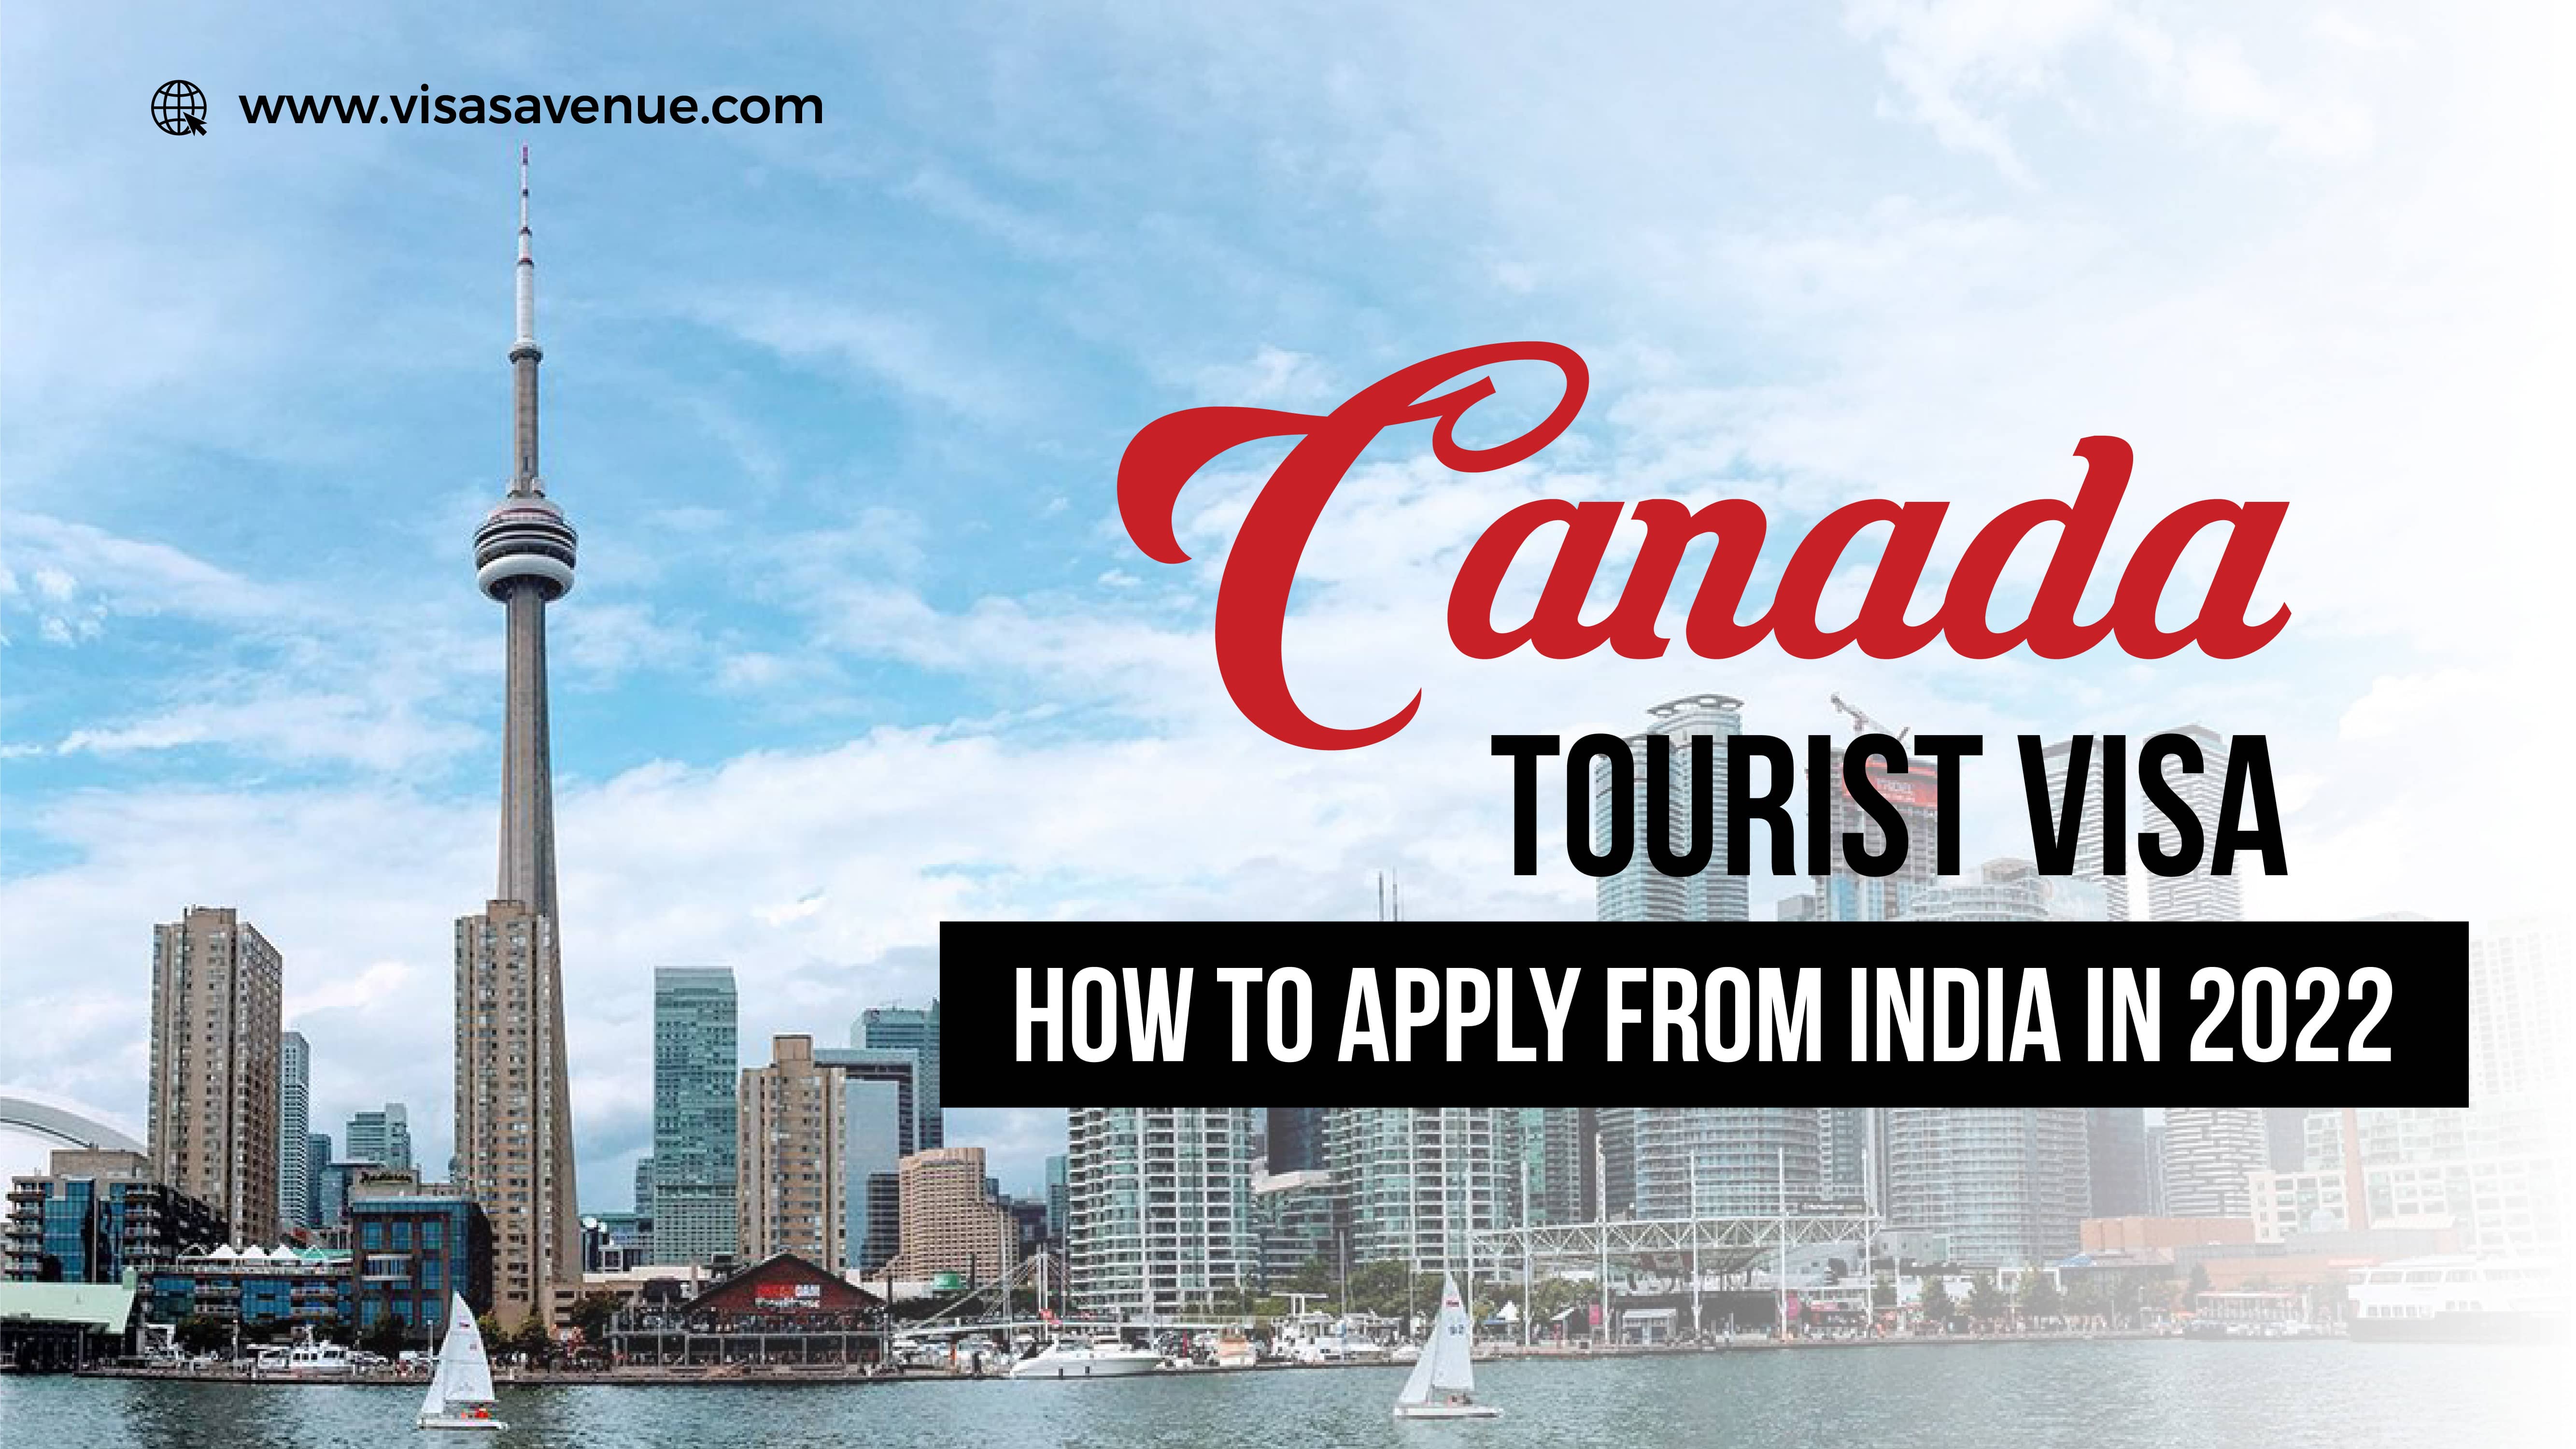 How to Apply Canada Tourist Visa from India in 2022